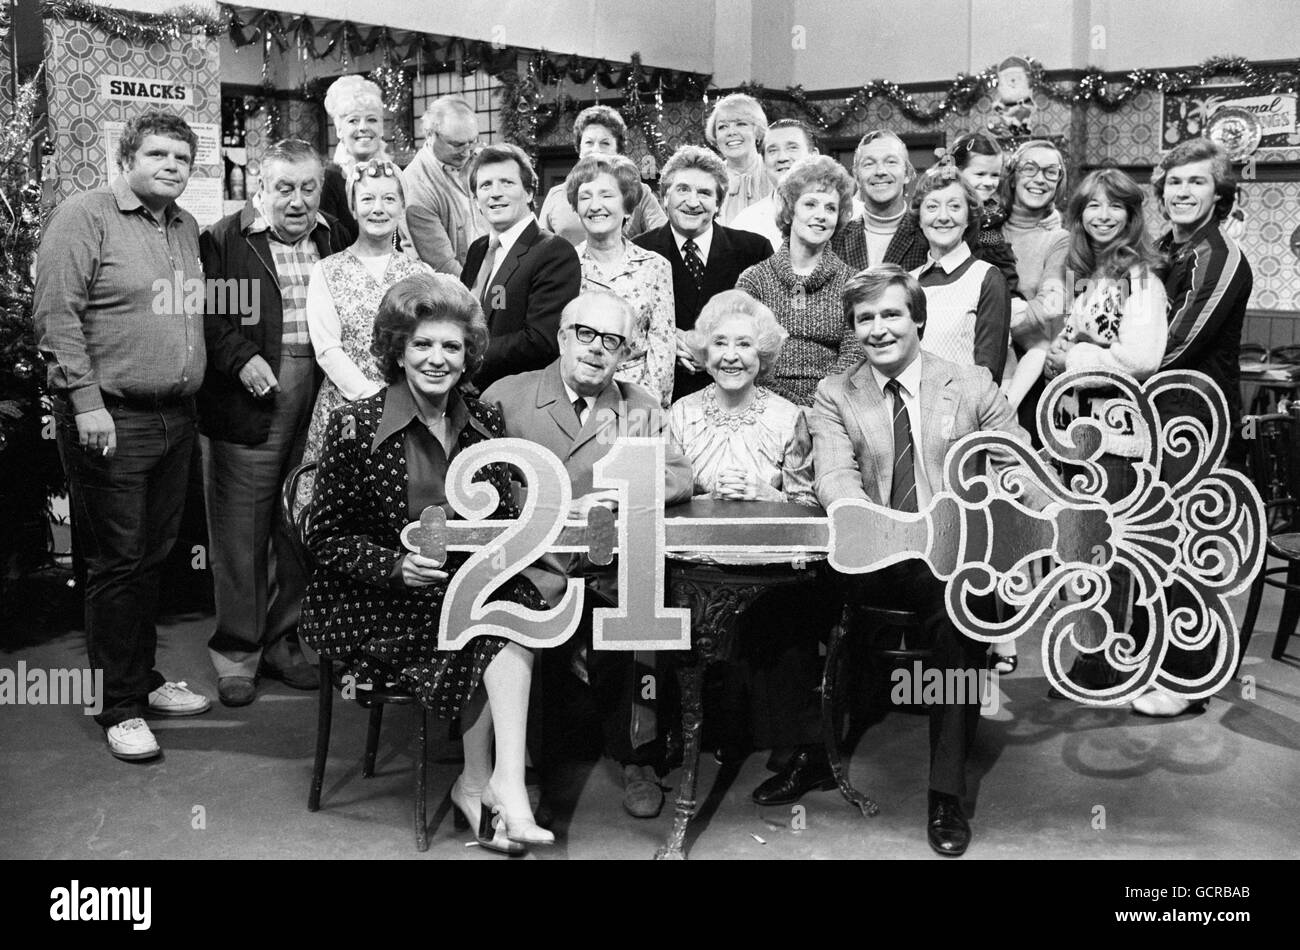 A giant 21st birthday key for Granada TV's cast of Coronation Street, celebrating the soap opera's 21st birthday in the interior set of the Rover's Return at Granada Studios, Manchester. Foreground, left to right, Pat Phoenix, Jack Howarth, Doris Speed and Bill Roache. Stock Photo